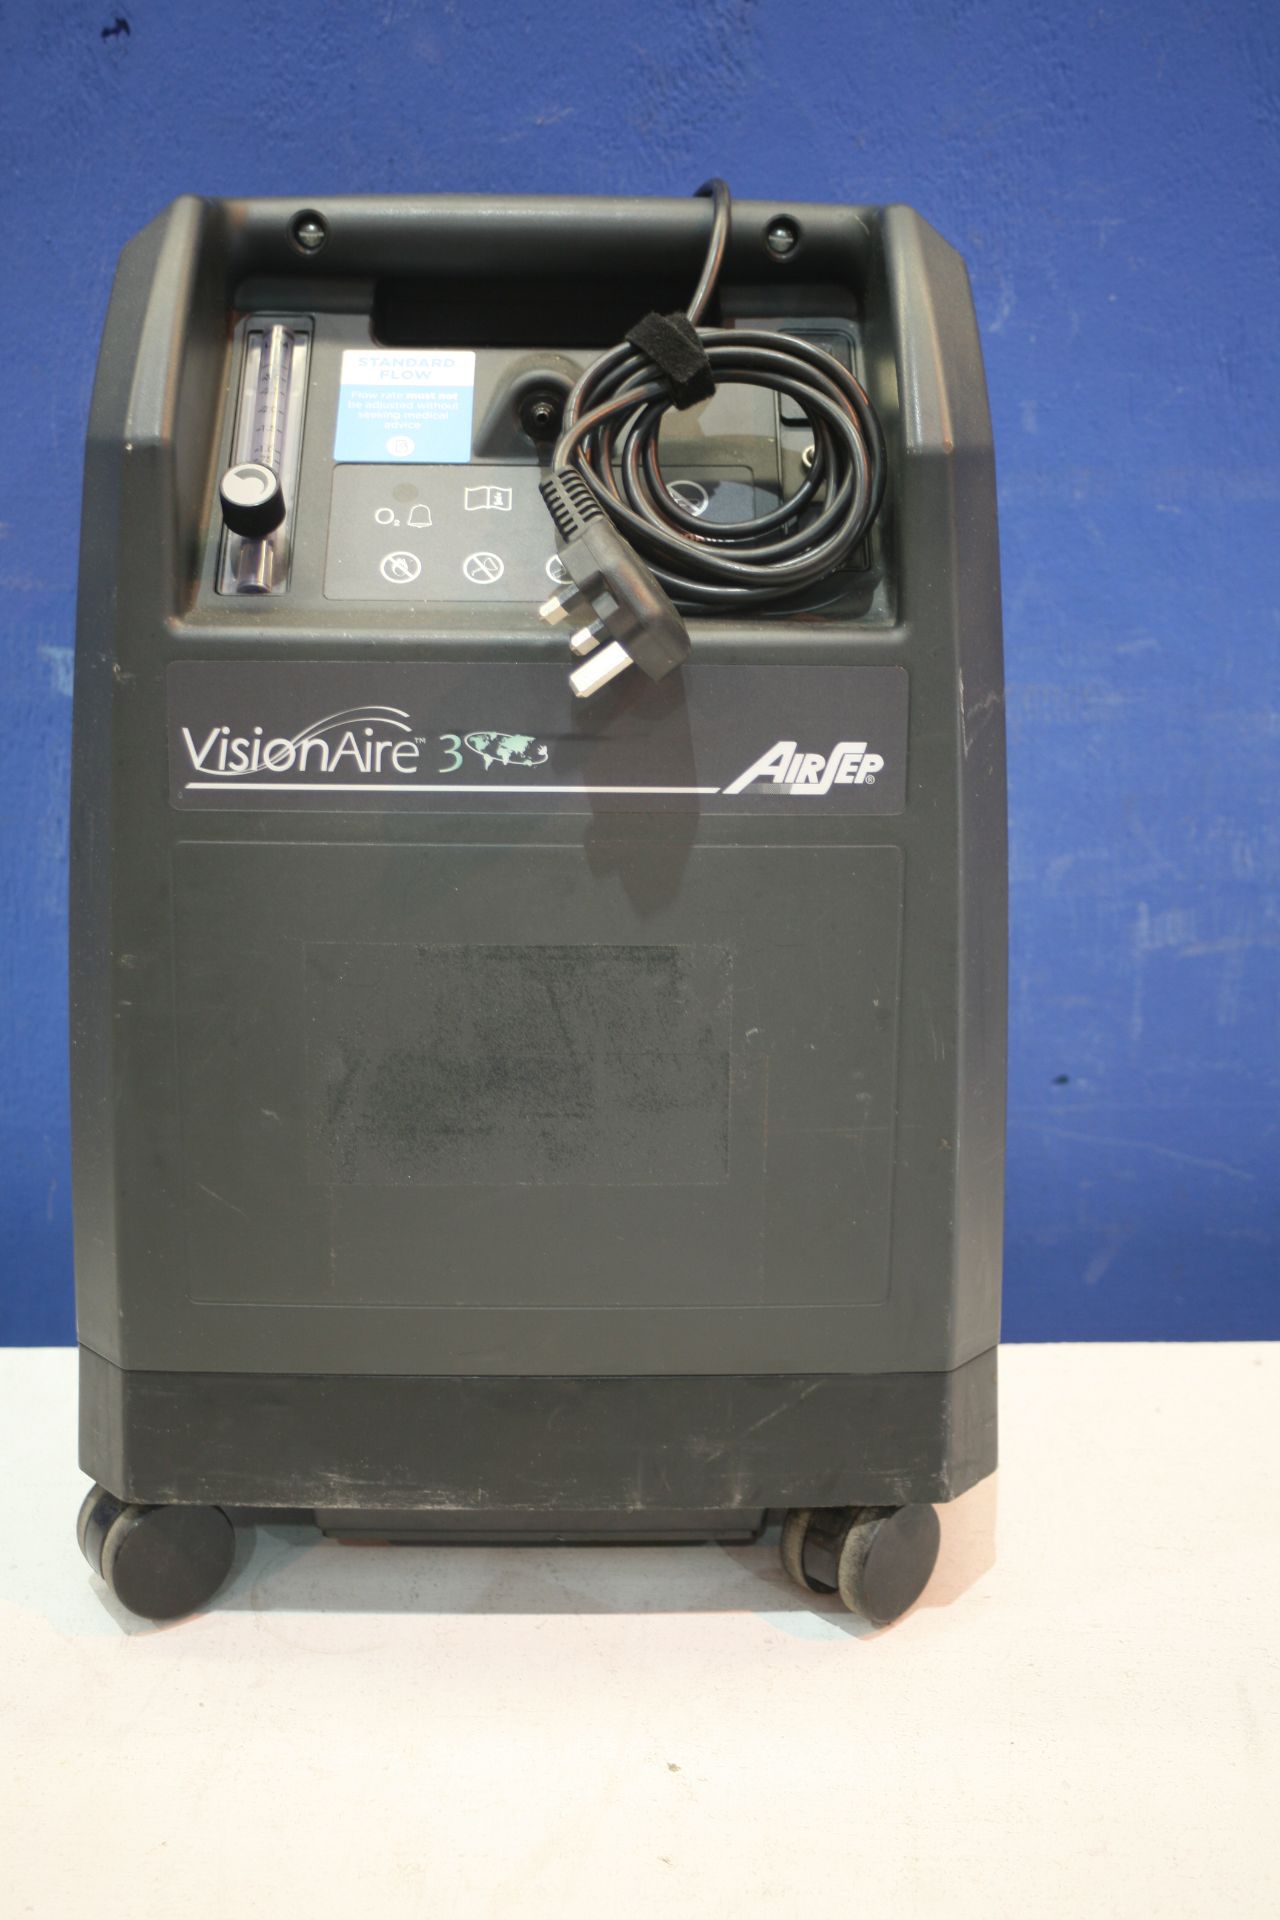 Airsep Vision Aire 3 Oxygen Concentrator *Powers Up*